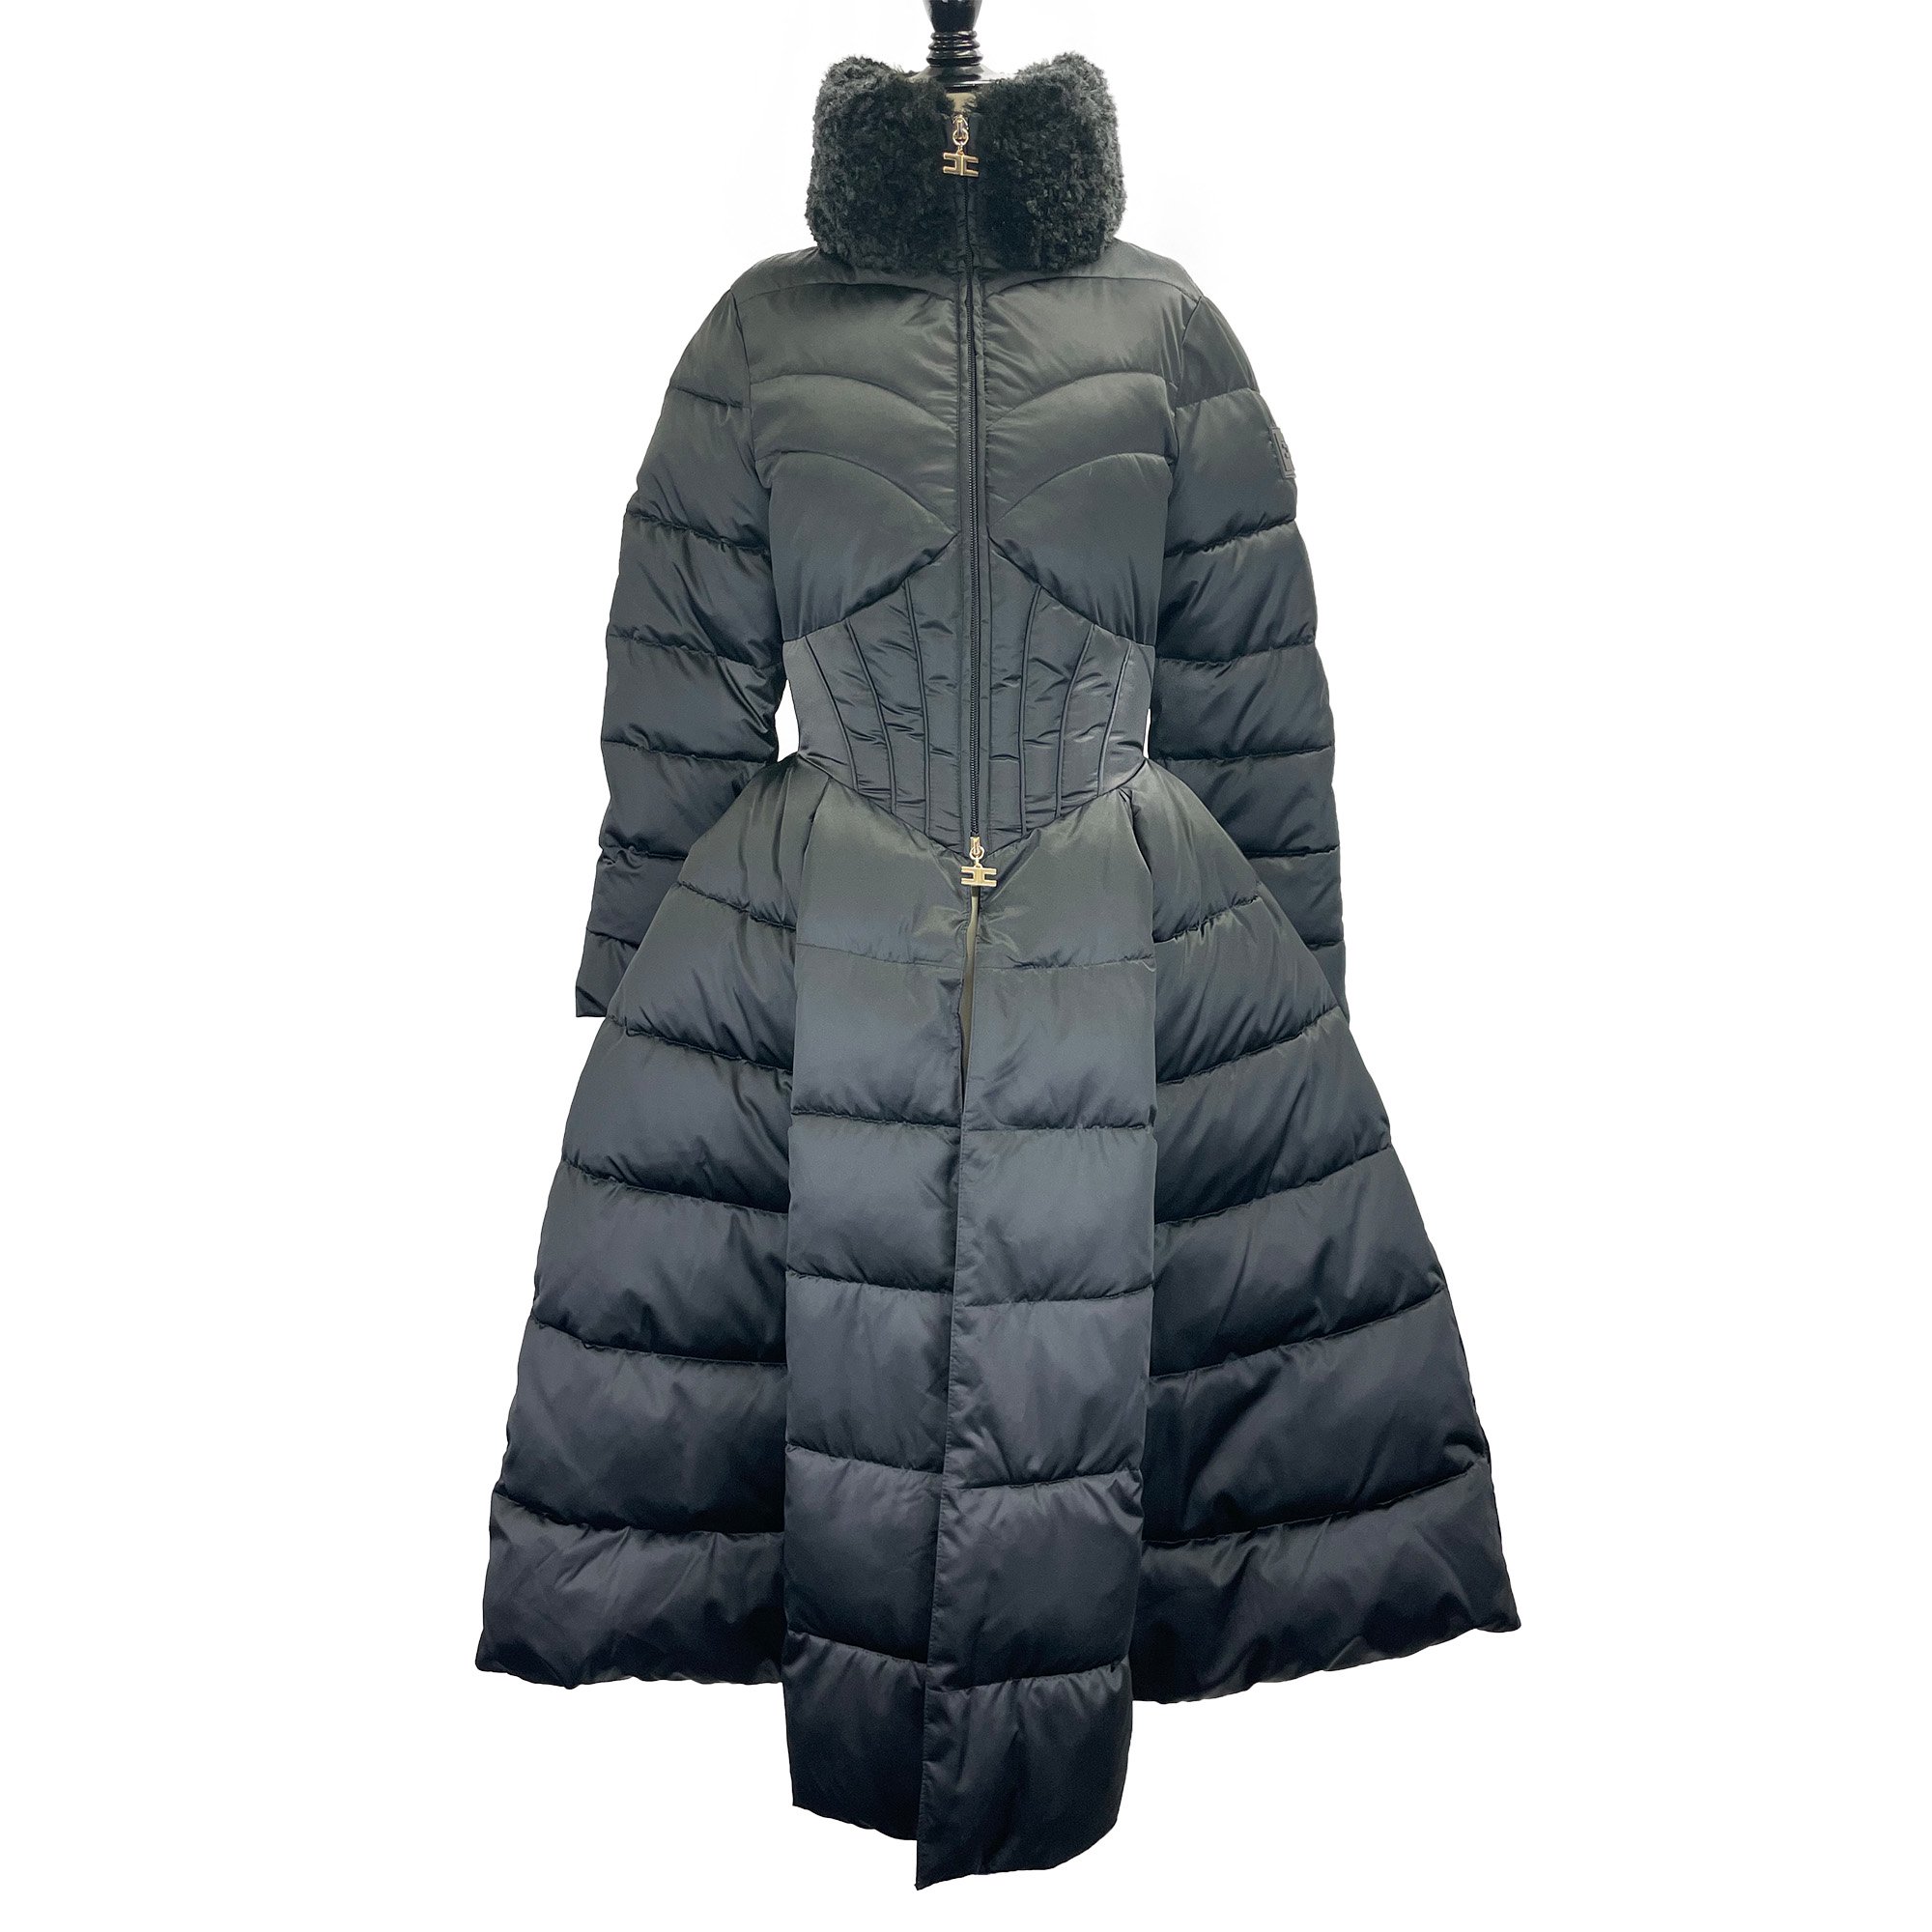 <img class='new_mark_img1' src='https://img.shop-pro.jp/img/new/icons7.gif' style='border:none;display:inline;margin:0px;padding:0px;width:auto;' />ELISABETTA FRANCHI DOWN COAT